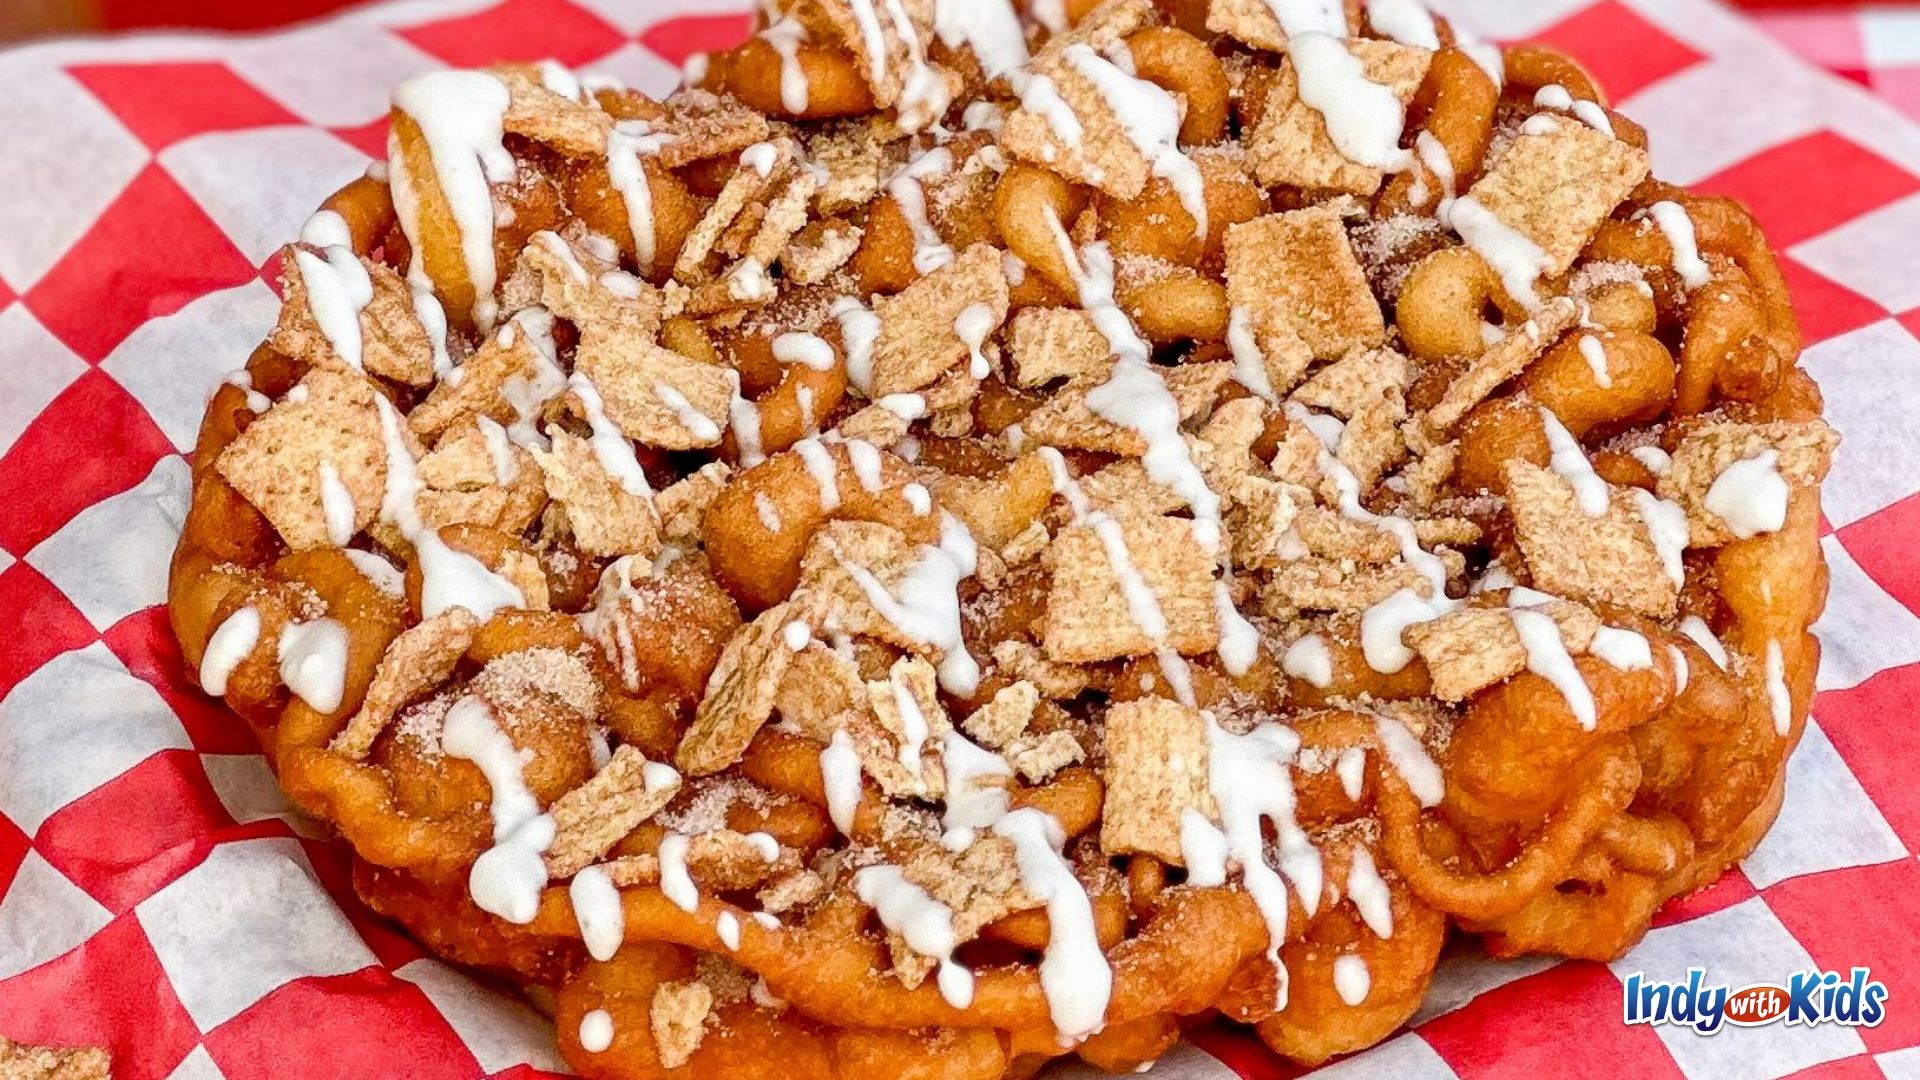 Indiana State Fair Food: A funnel cake on a red and white checkered paper is topped with cinnamon toast crunch cereal and a drizzle of vanilla frosting.